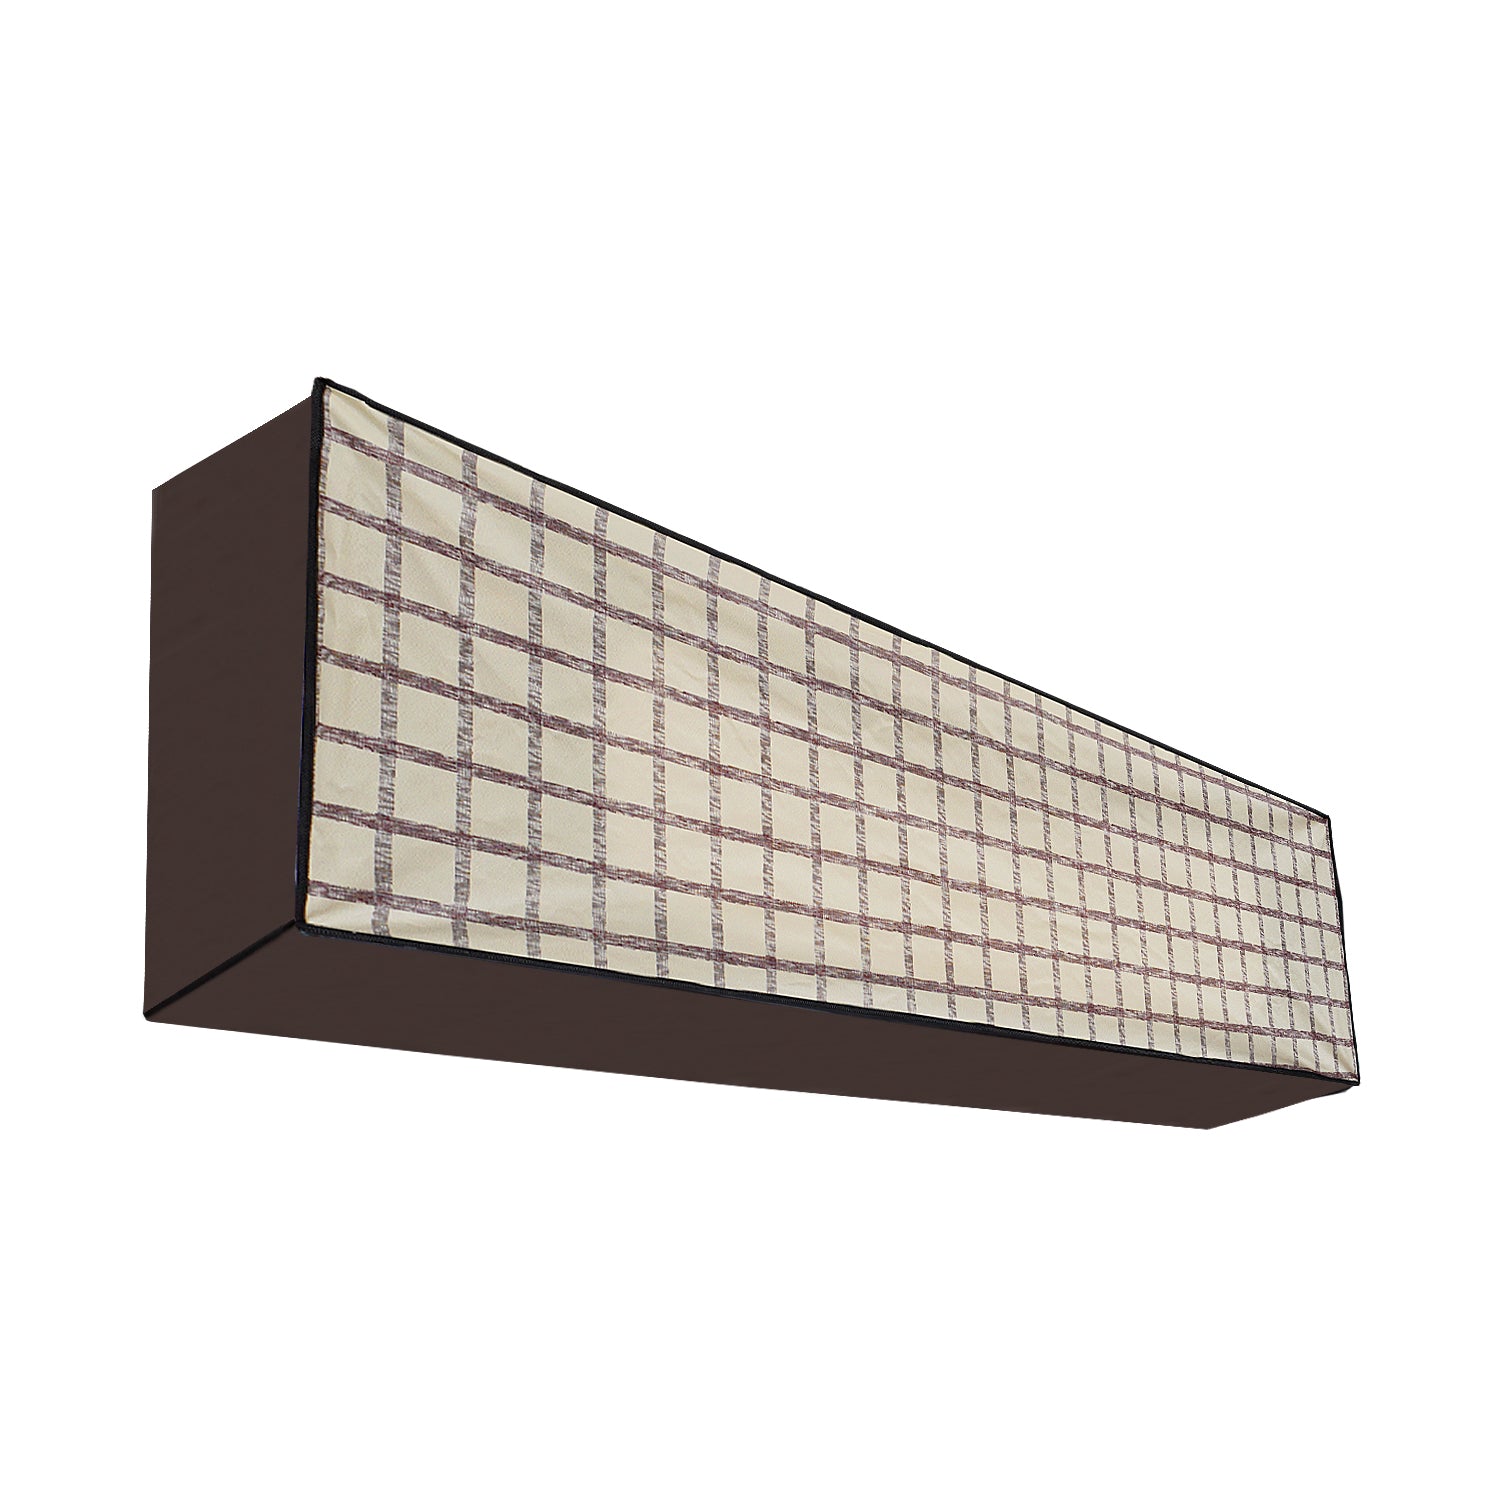 Waterproof and Dustproof Split Indoor AC Cover, CA10 - Dream Care Furnishings Private Limited